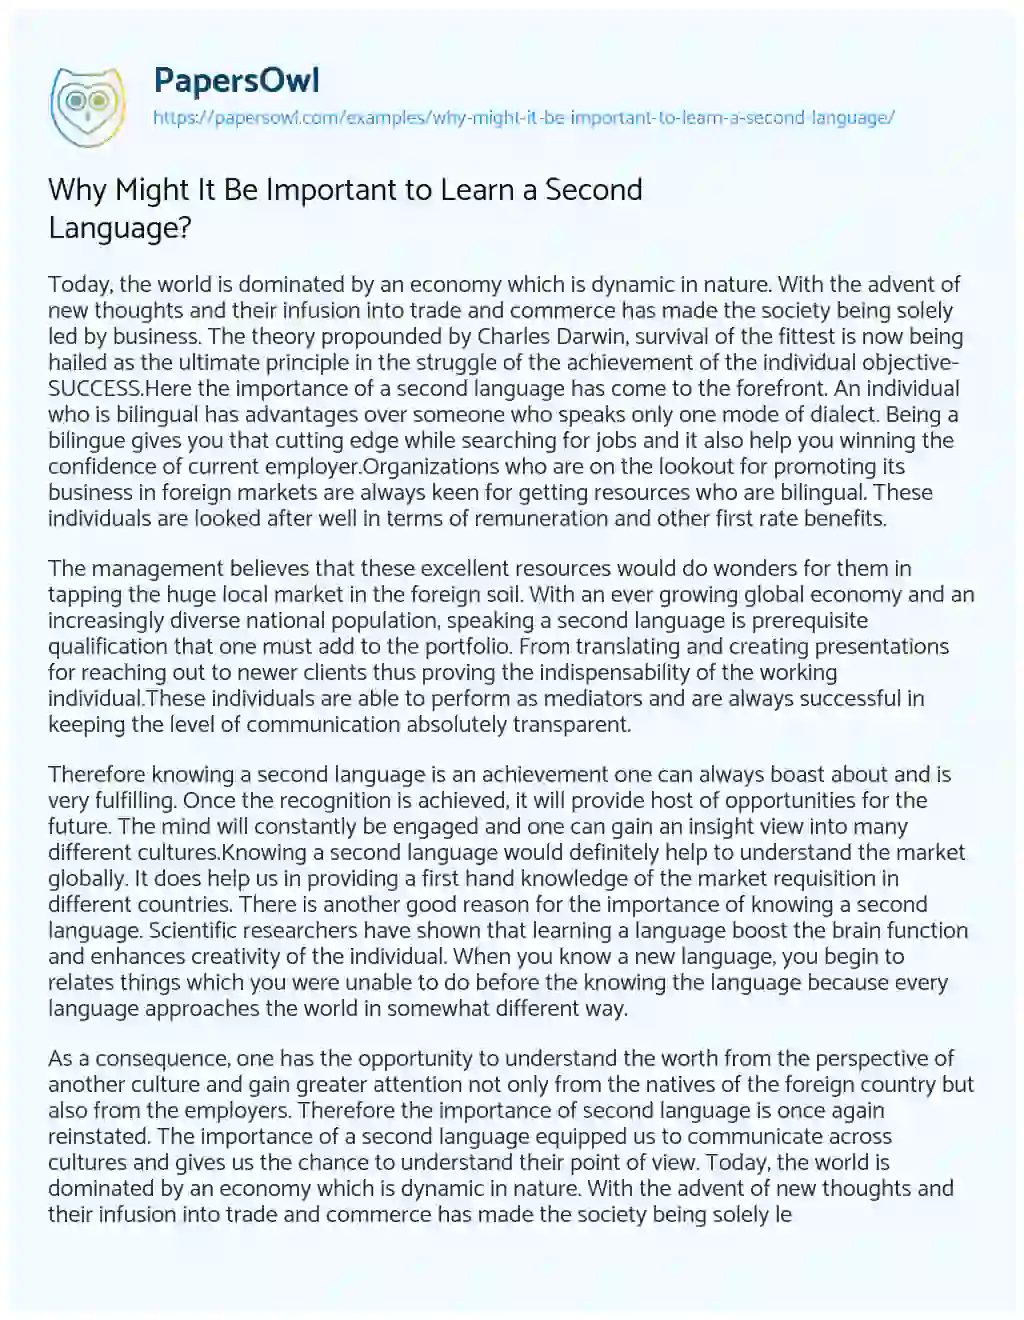 Essay on Why Might it be Important to Learn a Second Language?